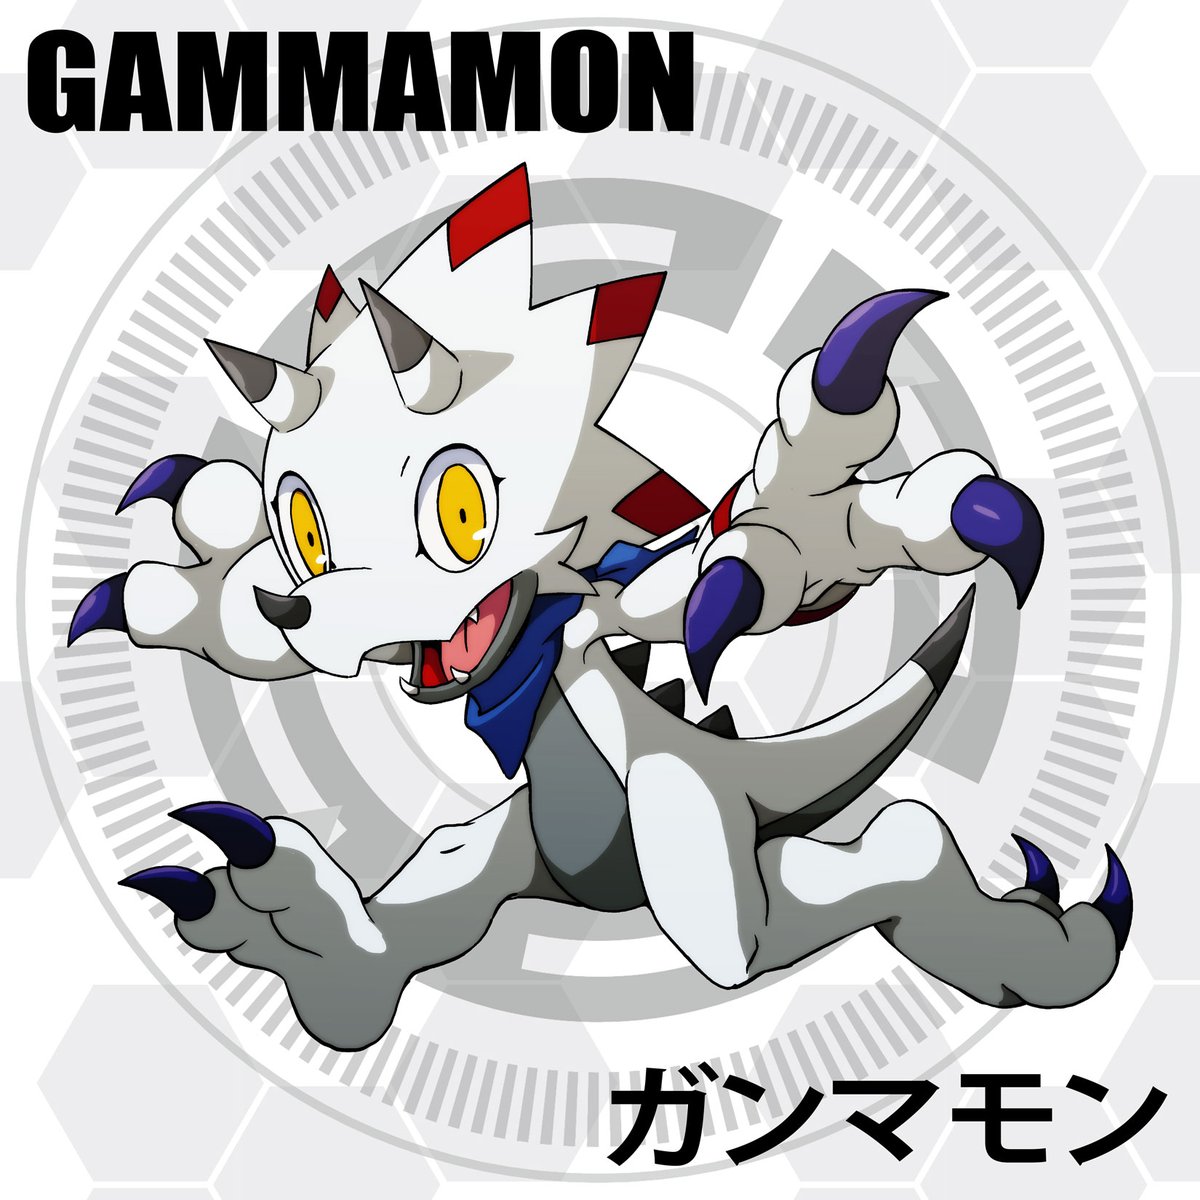 Re-uploads: This Time it's the Ghost Game Gang. Though Angoramon is my favorite of the three; I'm putting Jellymon in the spotlight because they're among the Digimon/Appmon I'll be using in my next Fakemon concepts. #Digimon #デジモン